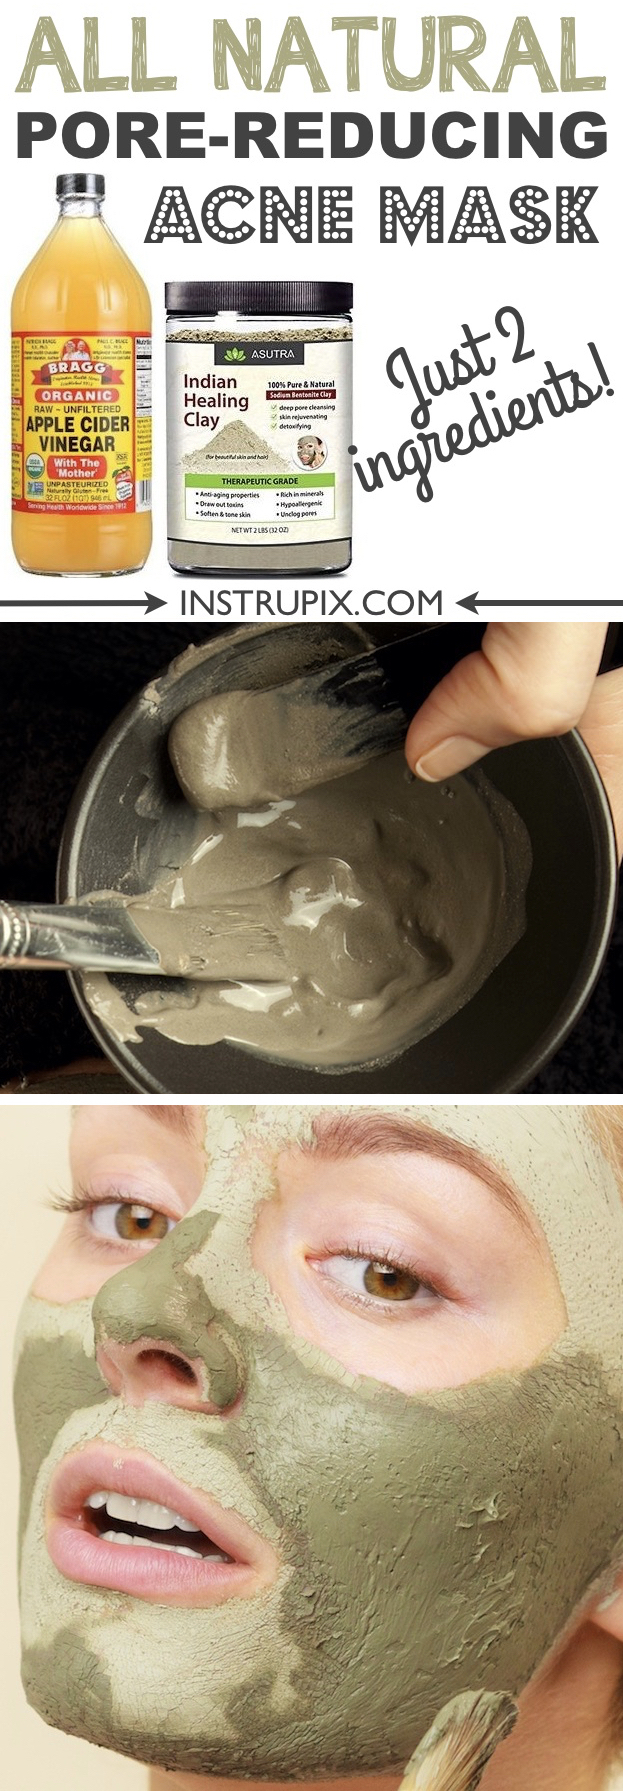 Beauty Tip For Skin: Homemade face mask for acne, blackheads and large pores! It's great for oily and dry skin! It also helps with fine lines and general detoxing. | Instrupix.com